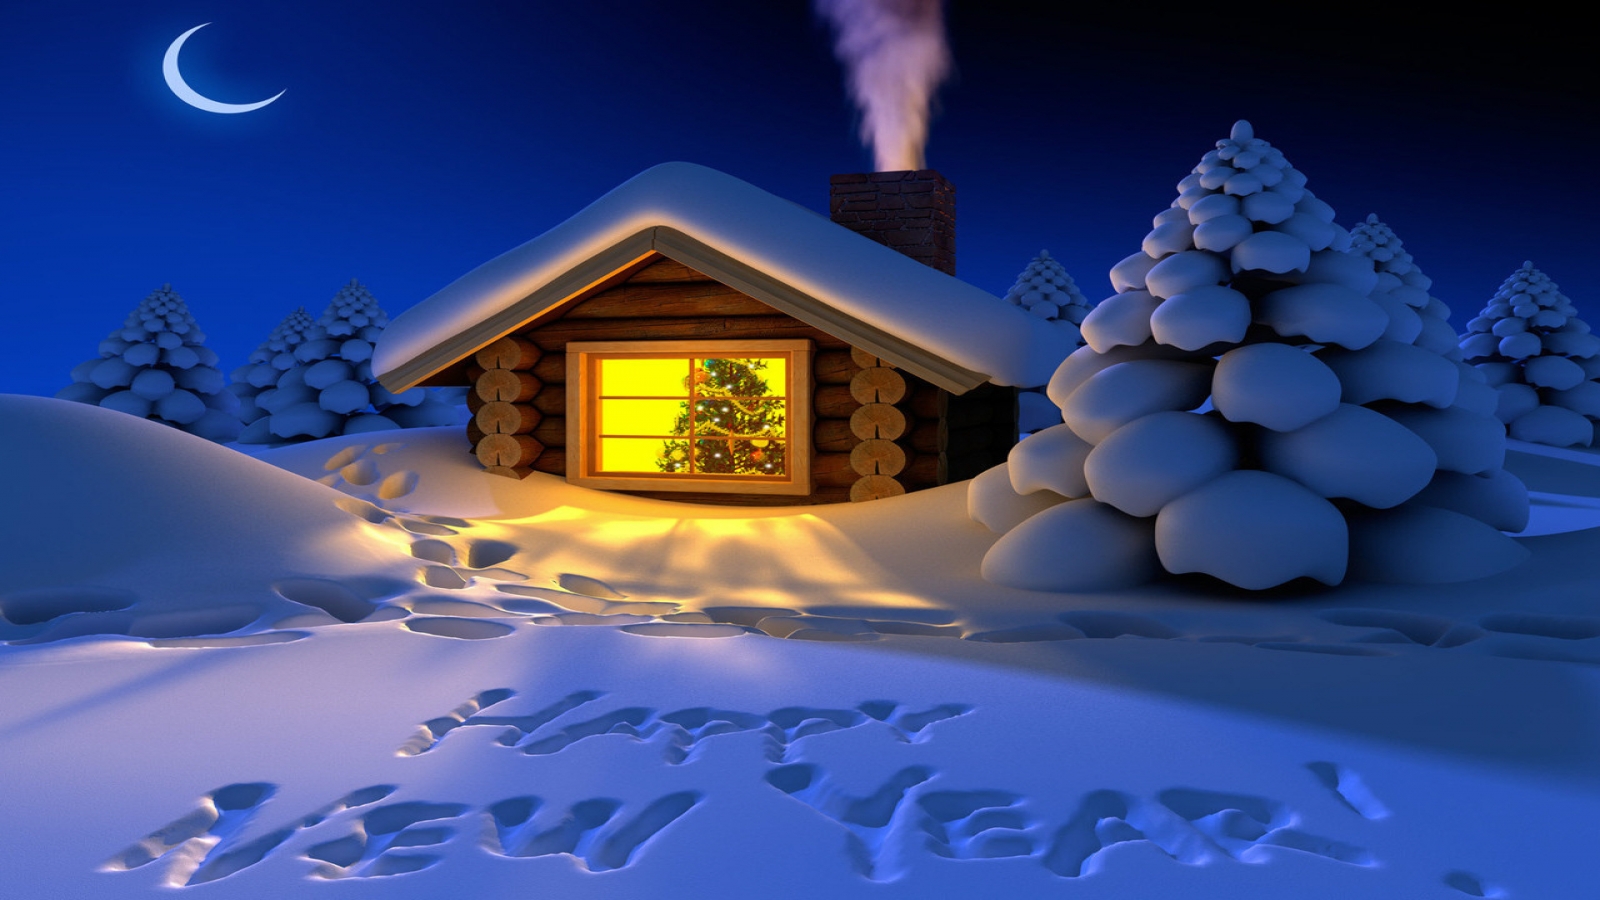 Happy New Year Wallpaper Pictures Image Jpg